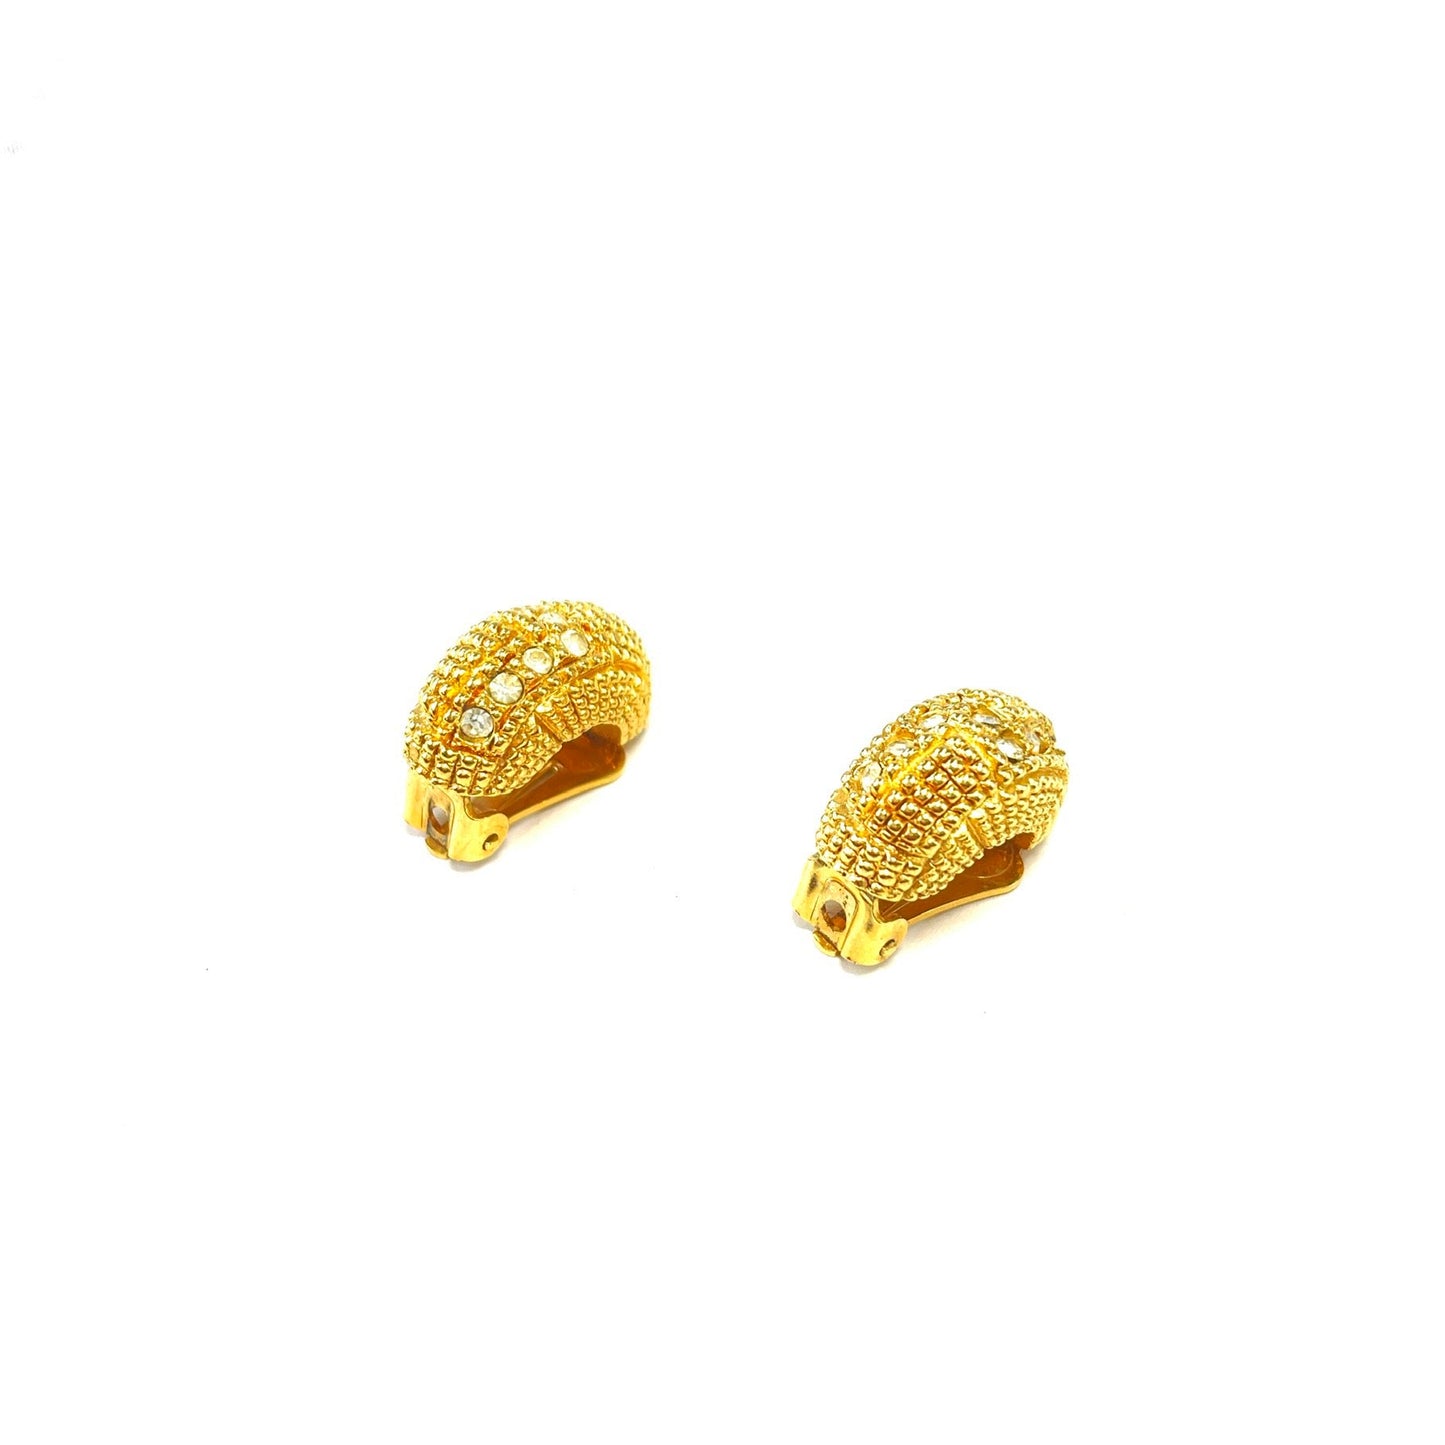 Christian Dior Stone Earrings Gold Vintage Old btydsy